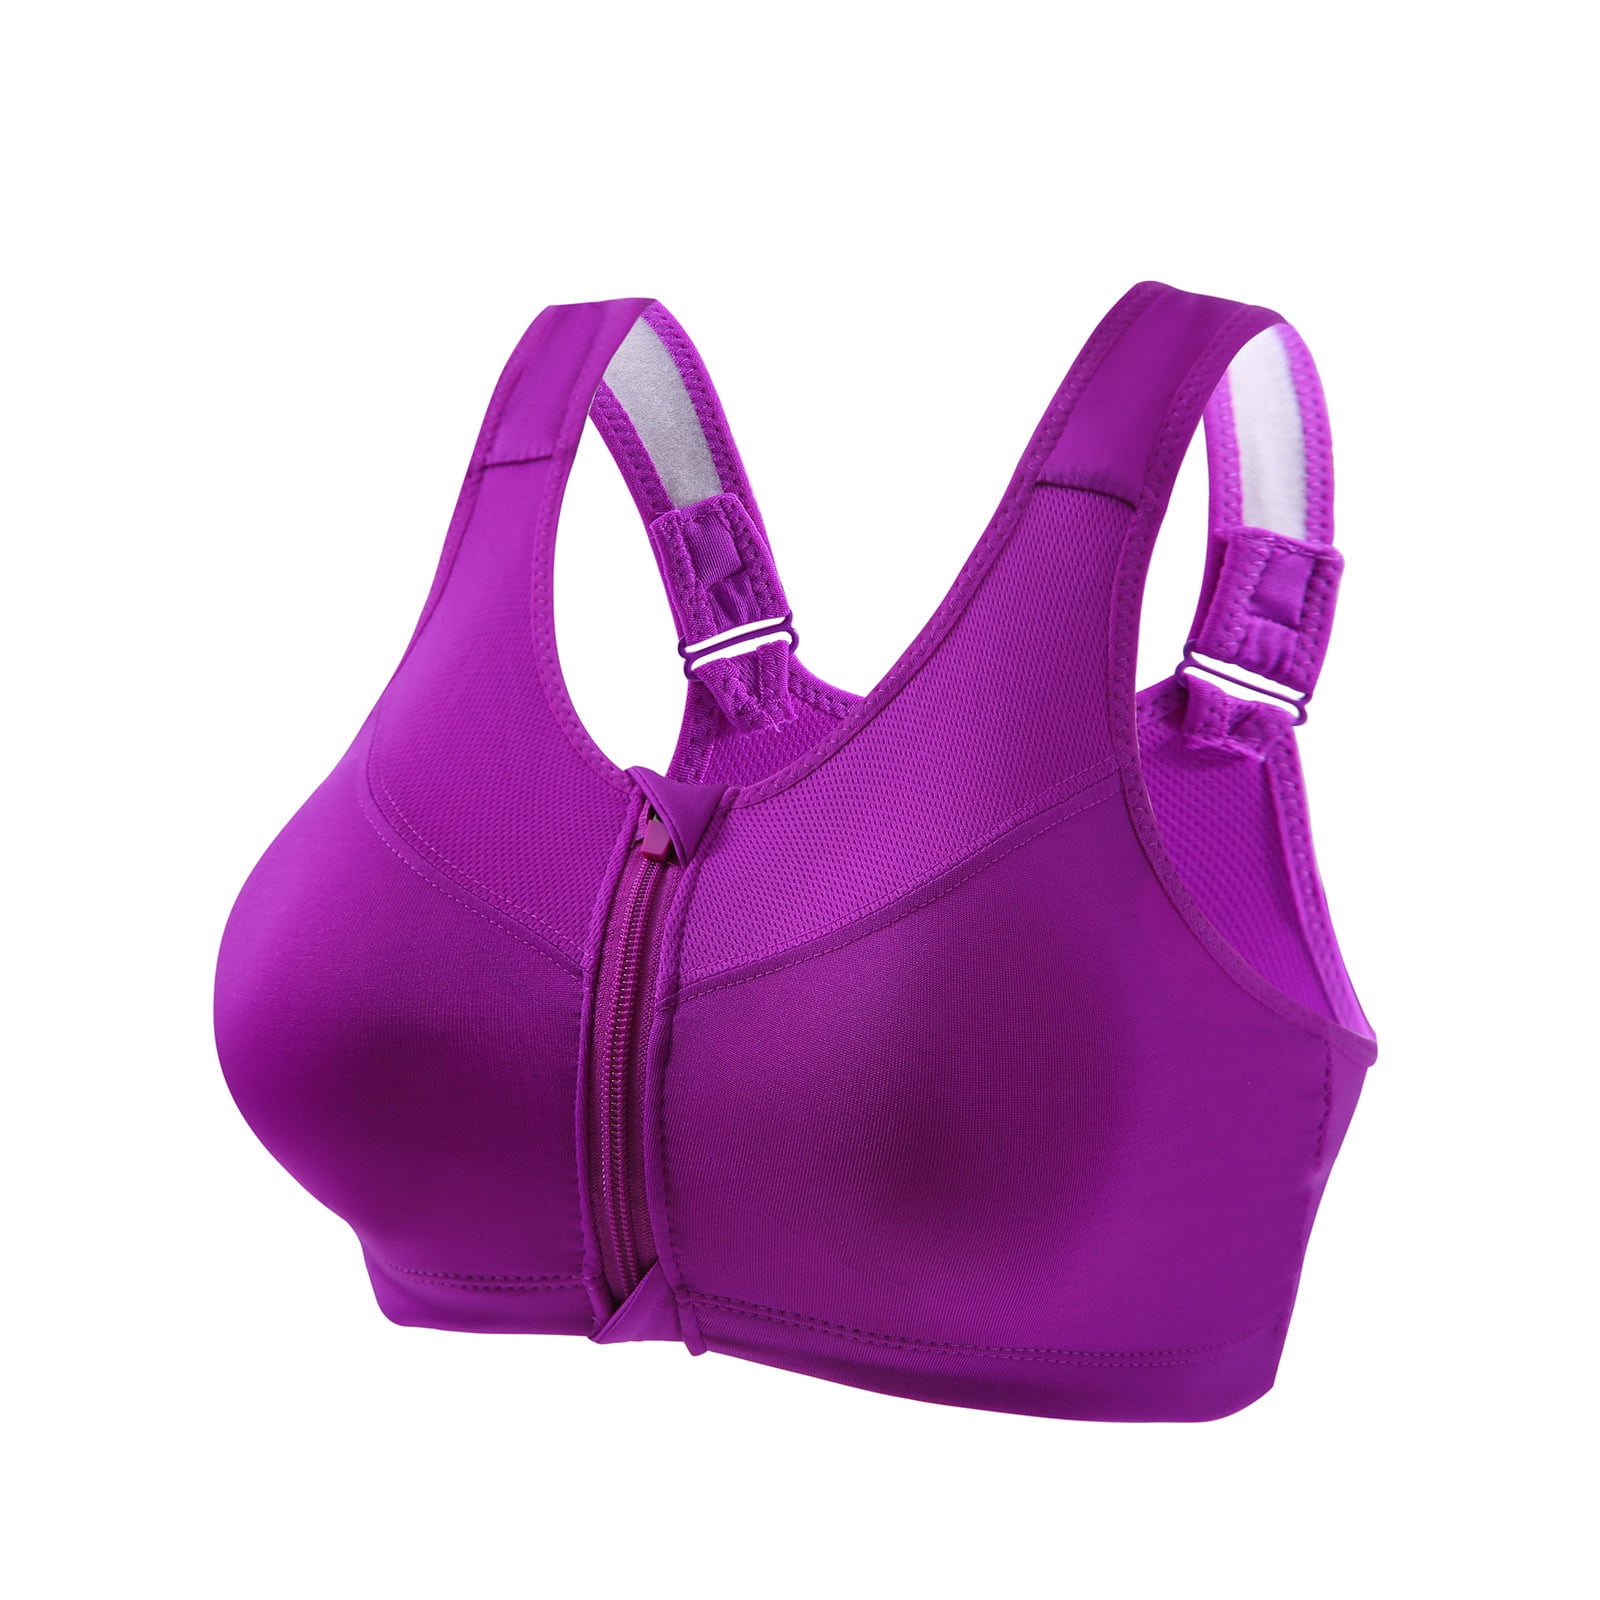 All-in-one sports bra women's high-strength shockproof running gathered  professional rope skipping beautiful strap chest pad can be worn outside